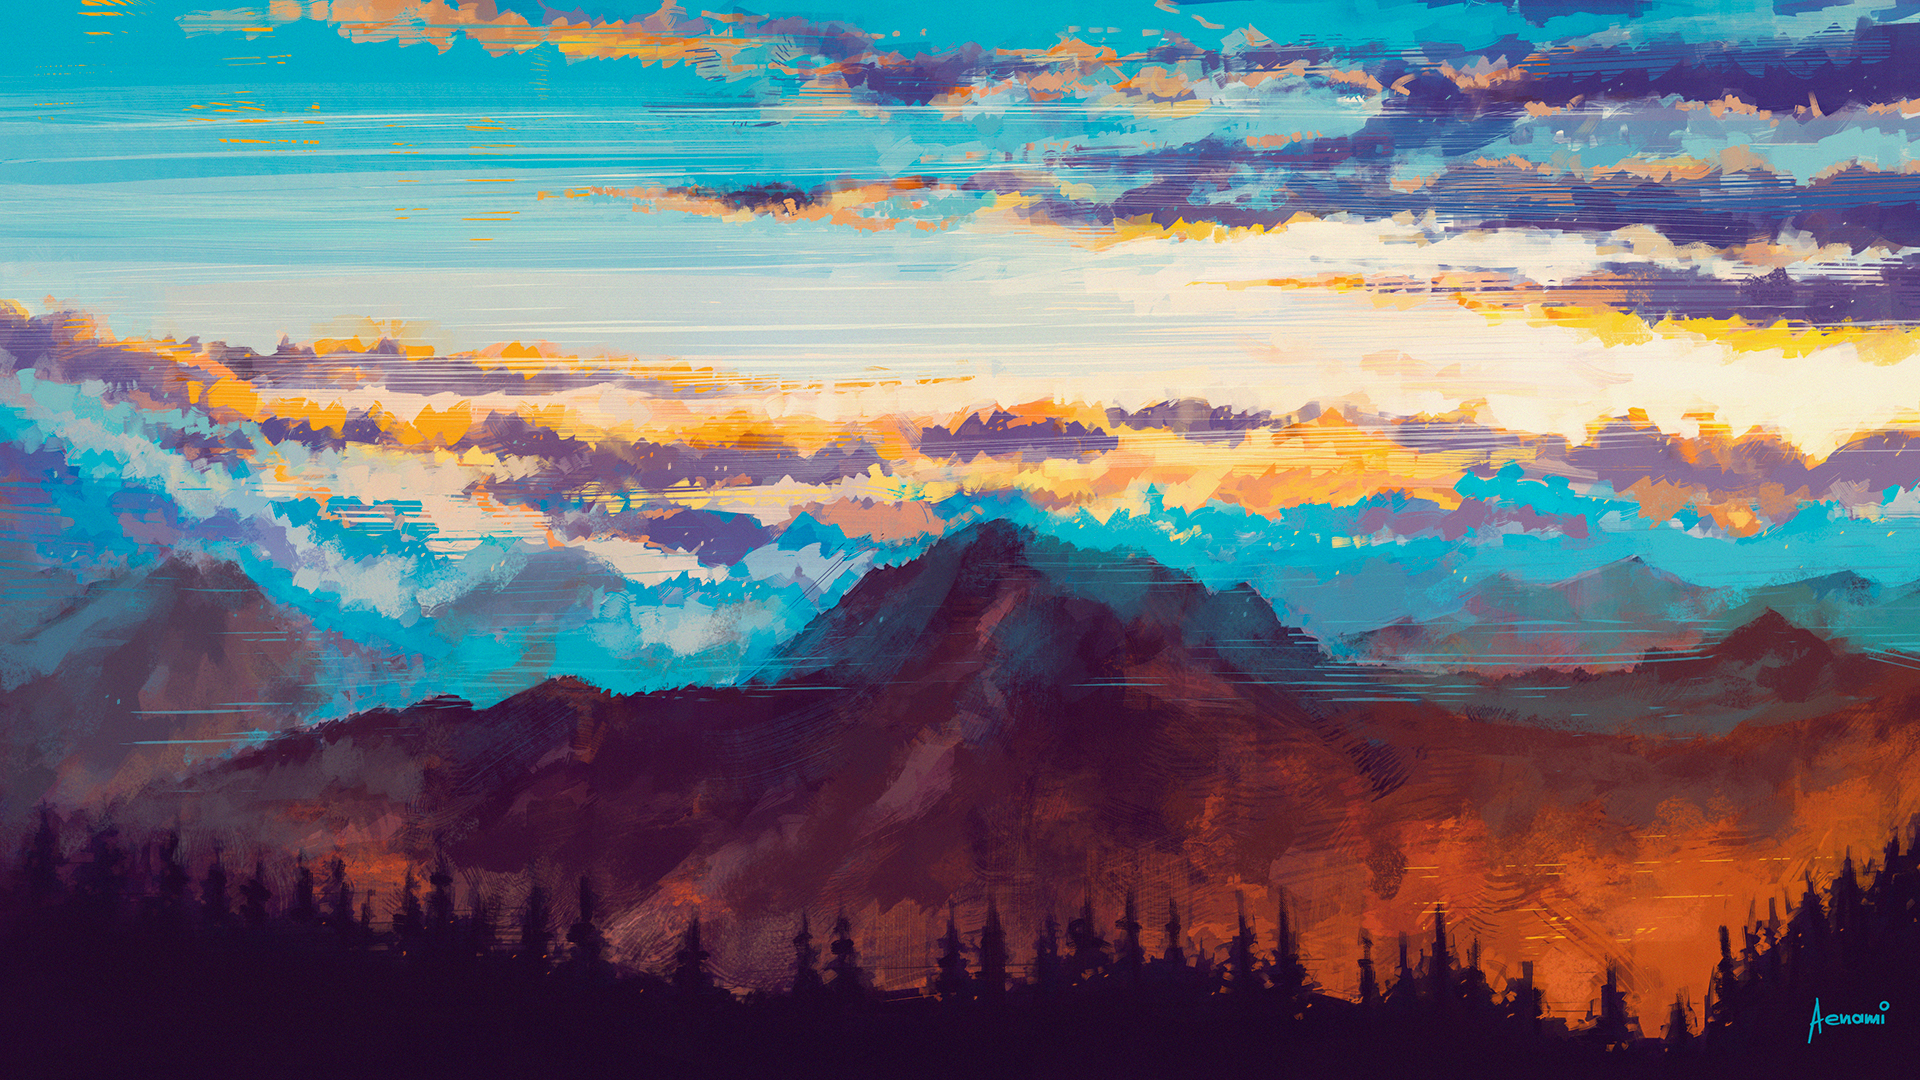 Artistic Mountain HD Wallpaper | Background Image